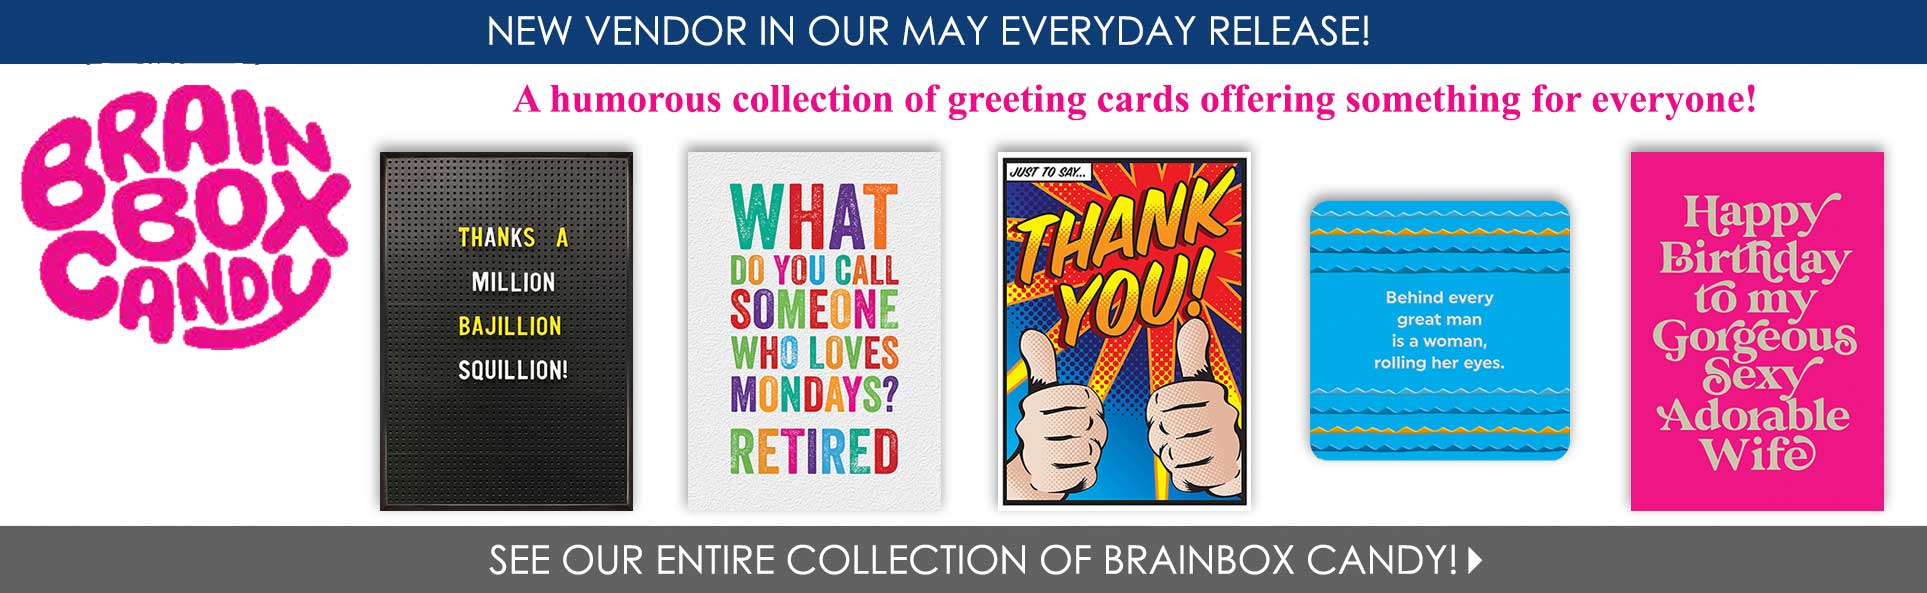 Brainbox Candy brings humorous cards for all occasions!